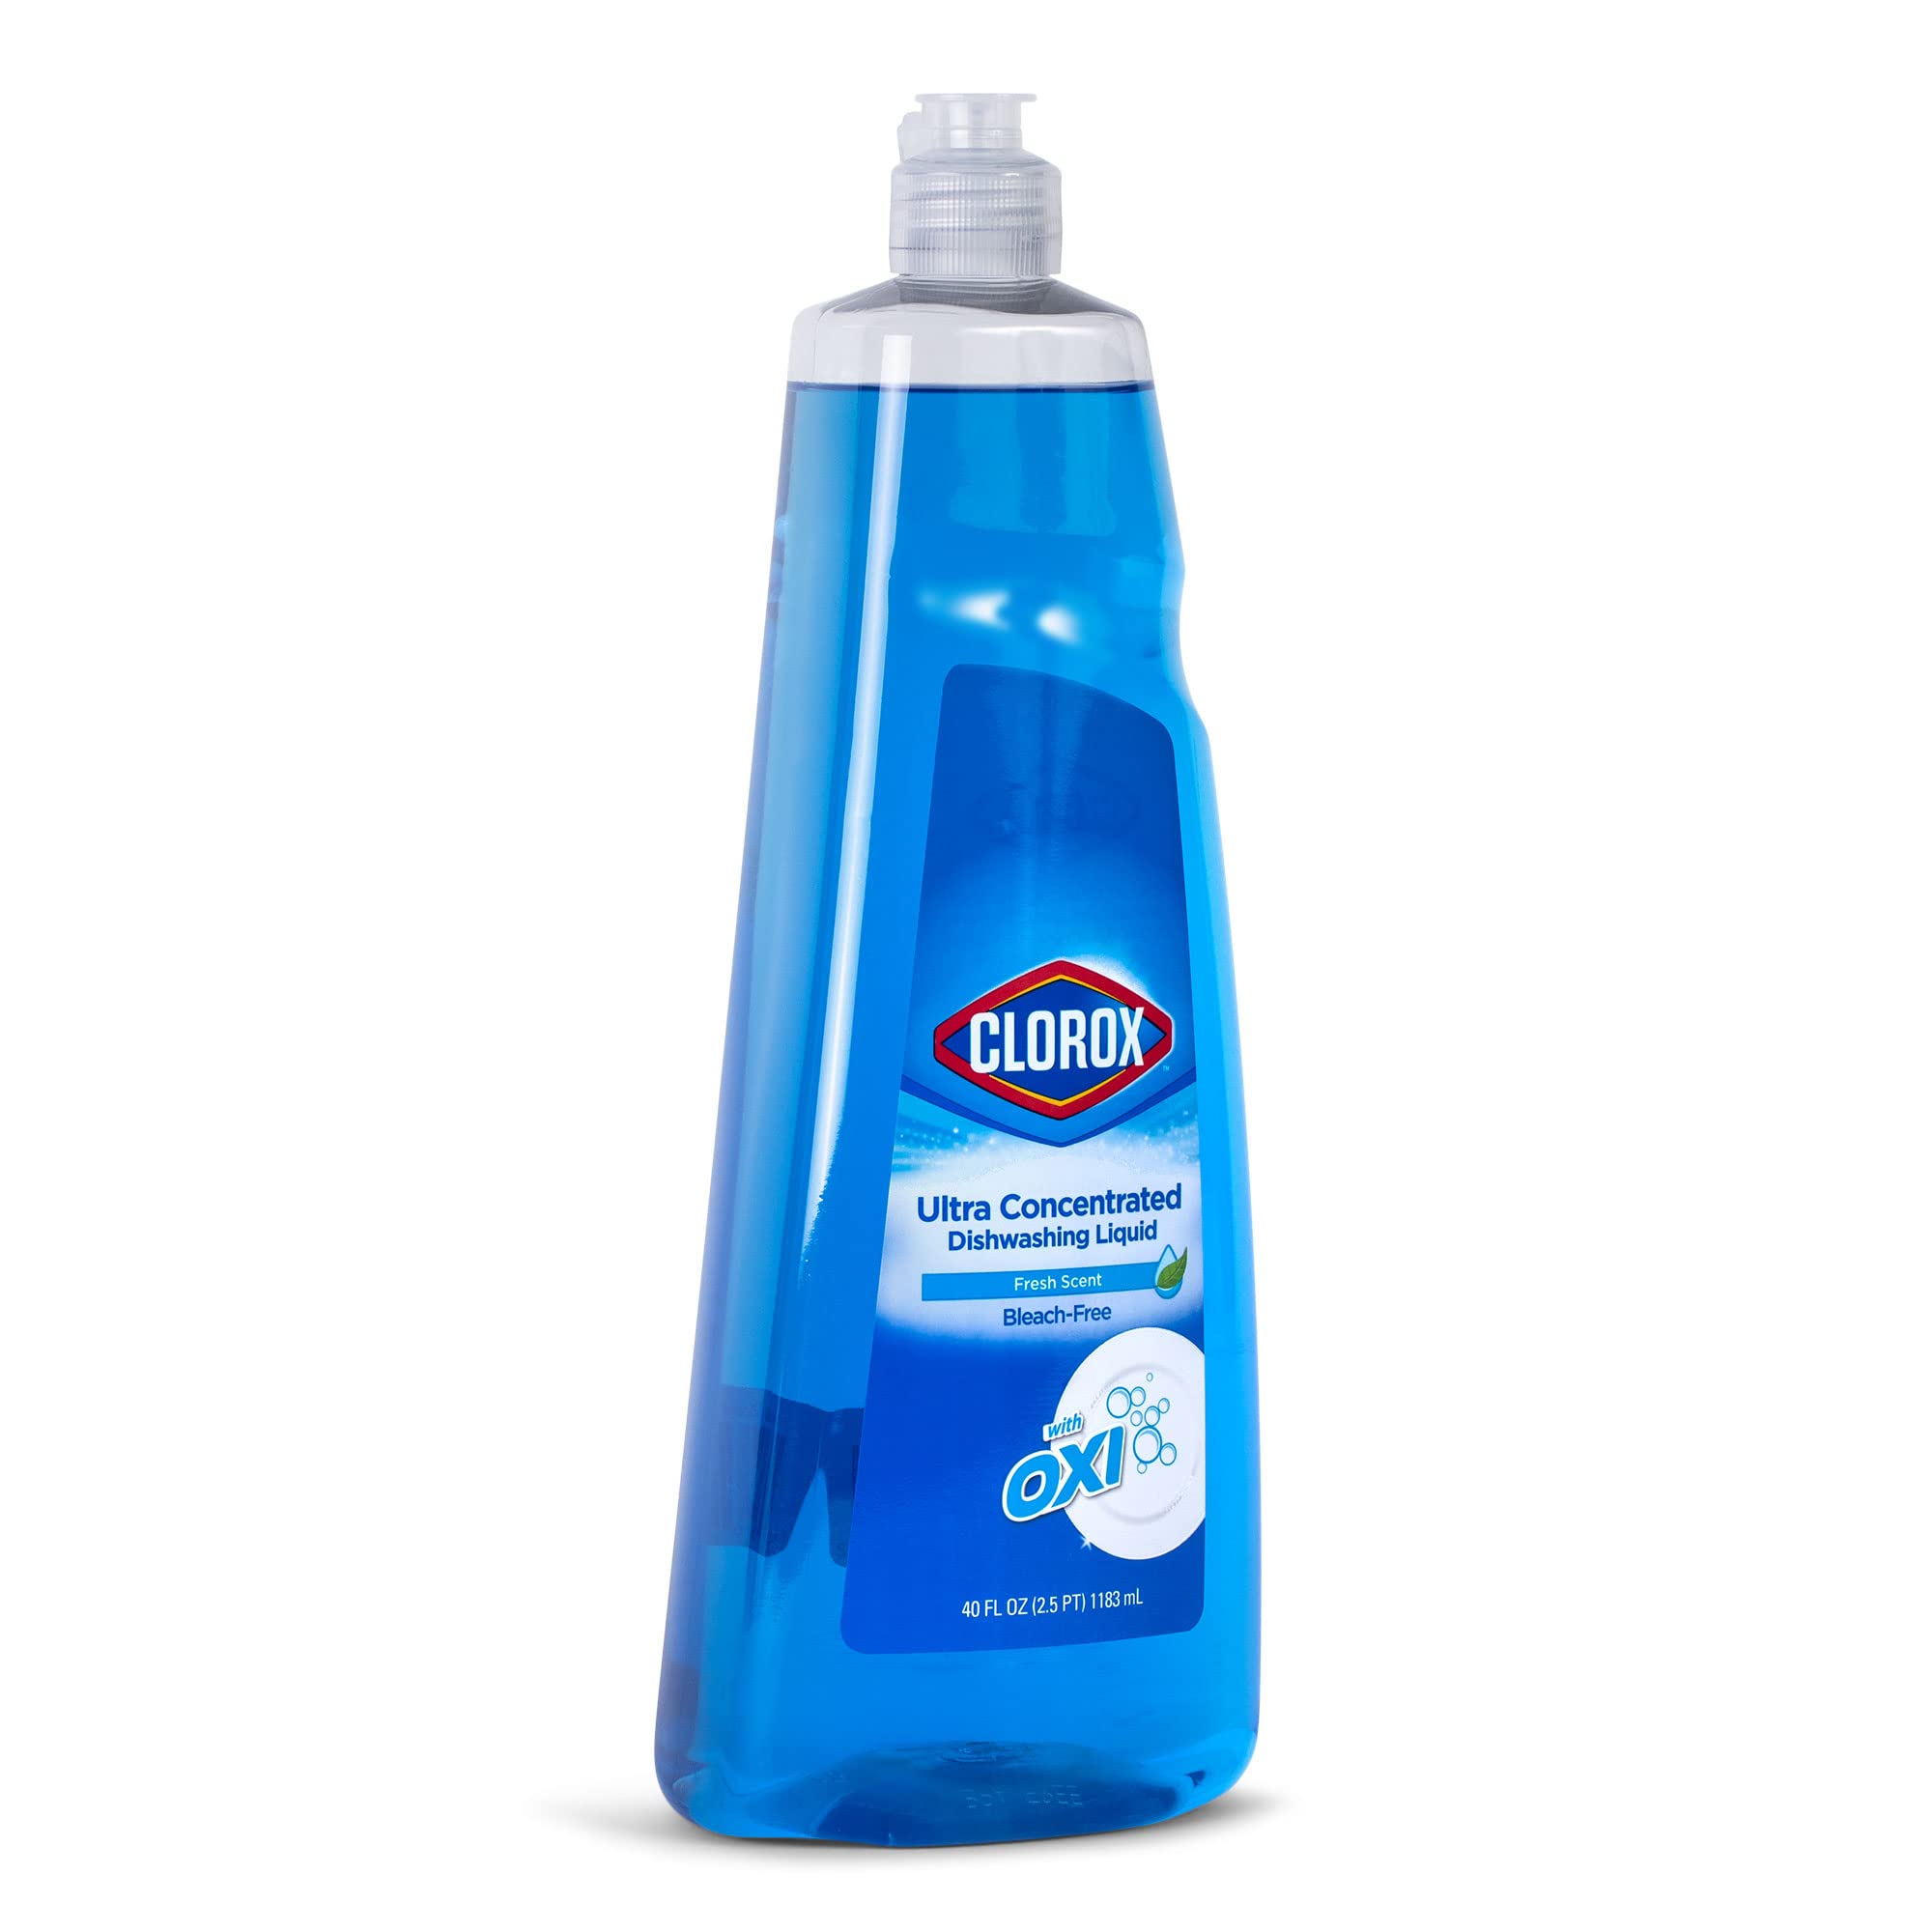 Clorox Liquid Dish Soap with Oxi in Fresh Scent, 40 Fl Oz | Bleach-Free Dishwashing Liquid Powers Through Grease to Wash Dishes and Clean | Ultra Concentrated Clorox Dishwashing Soap